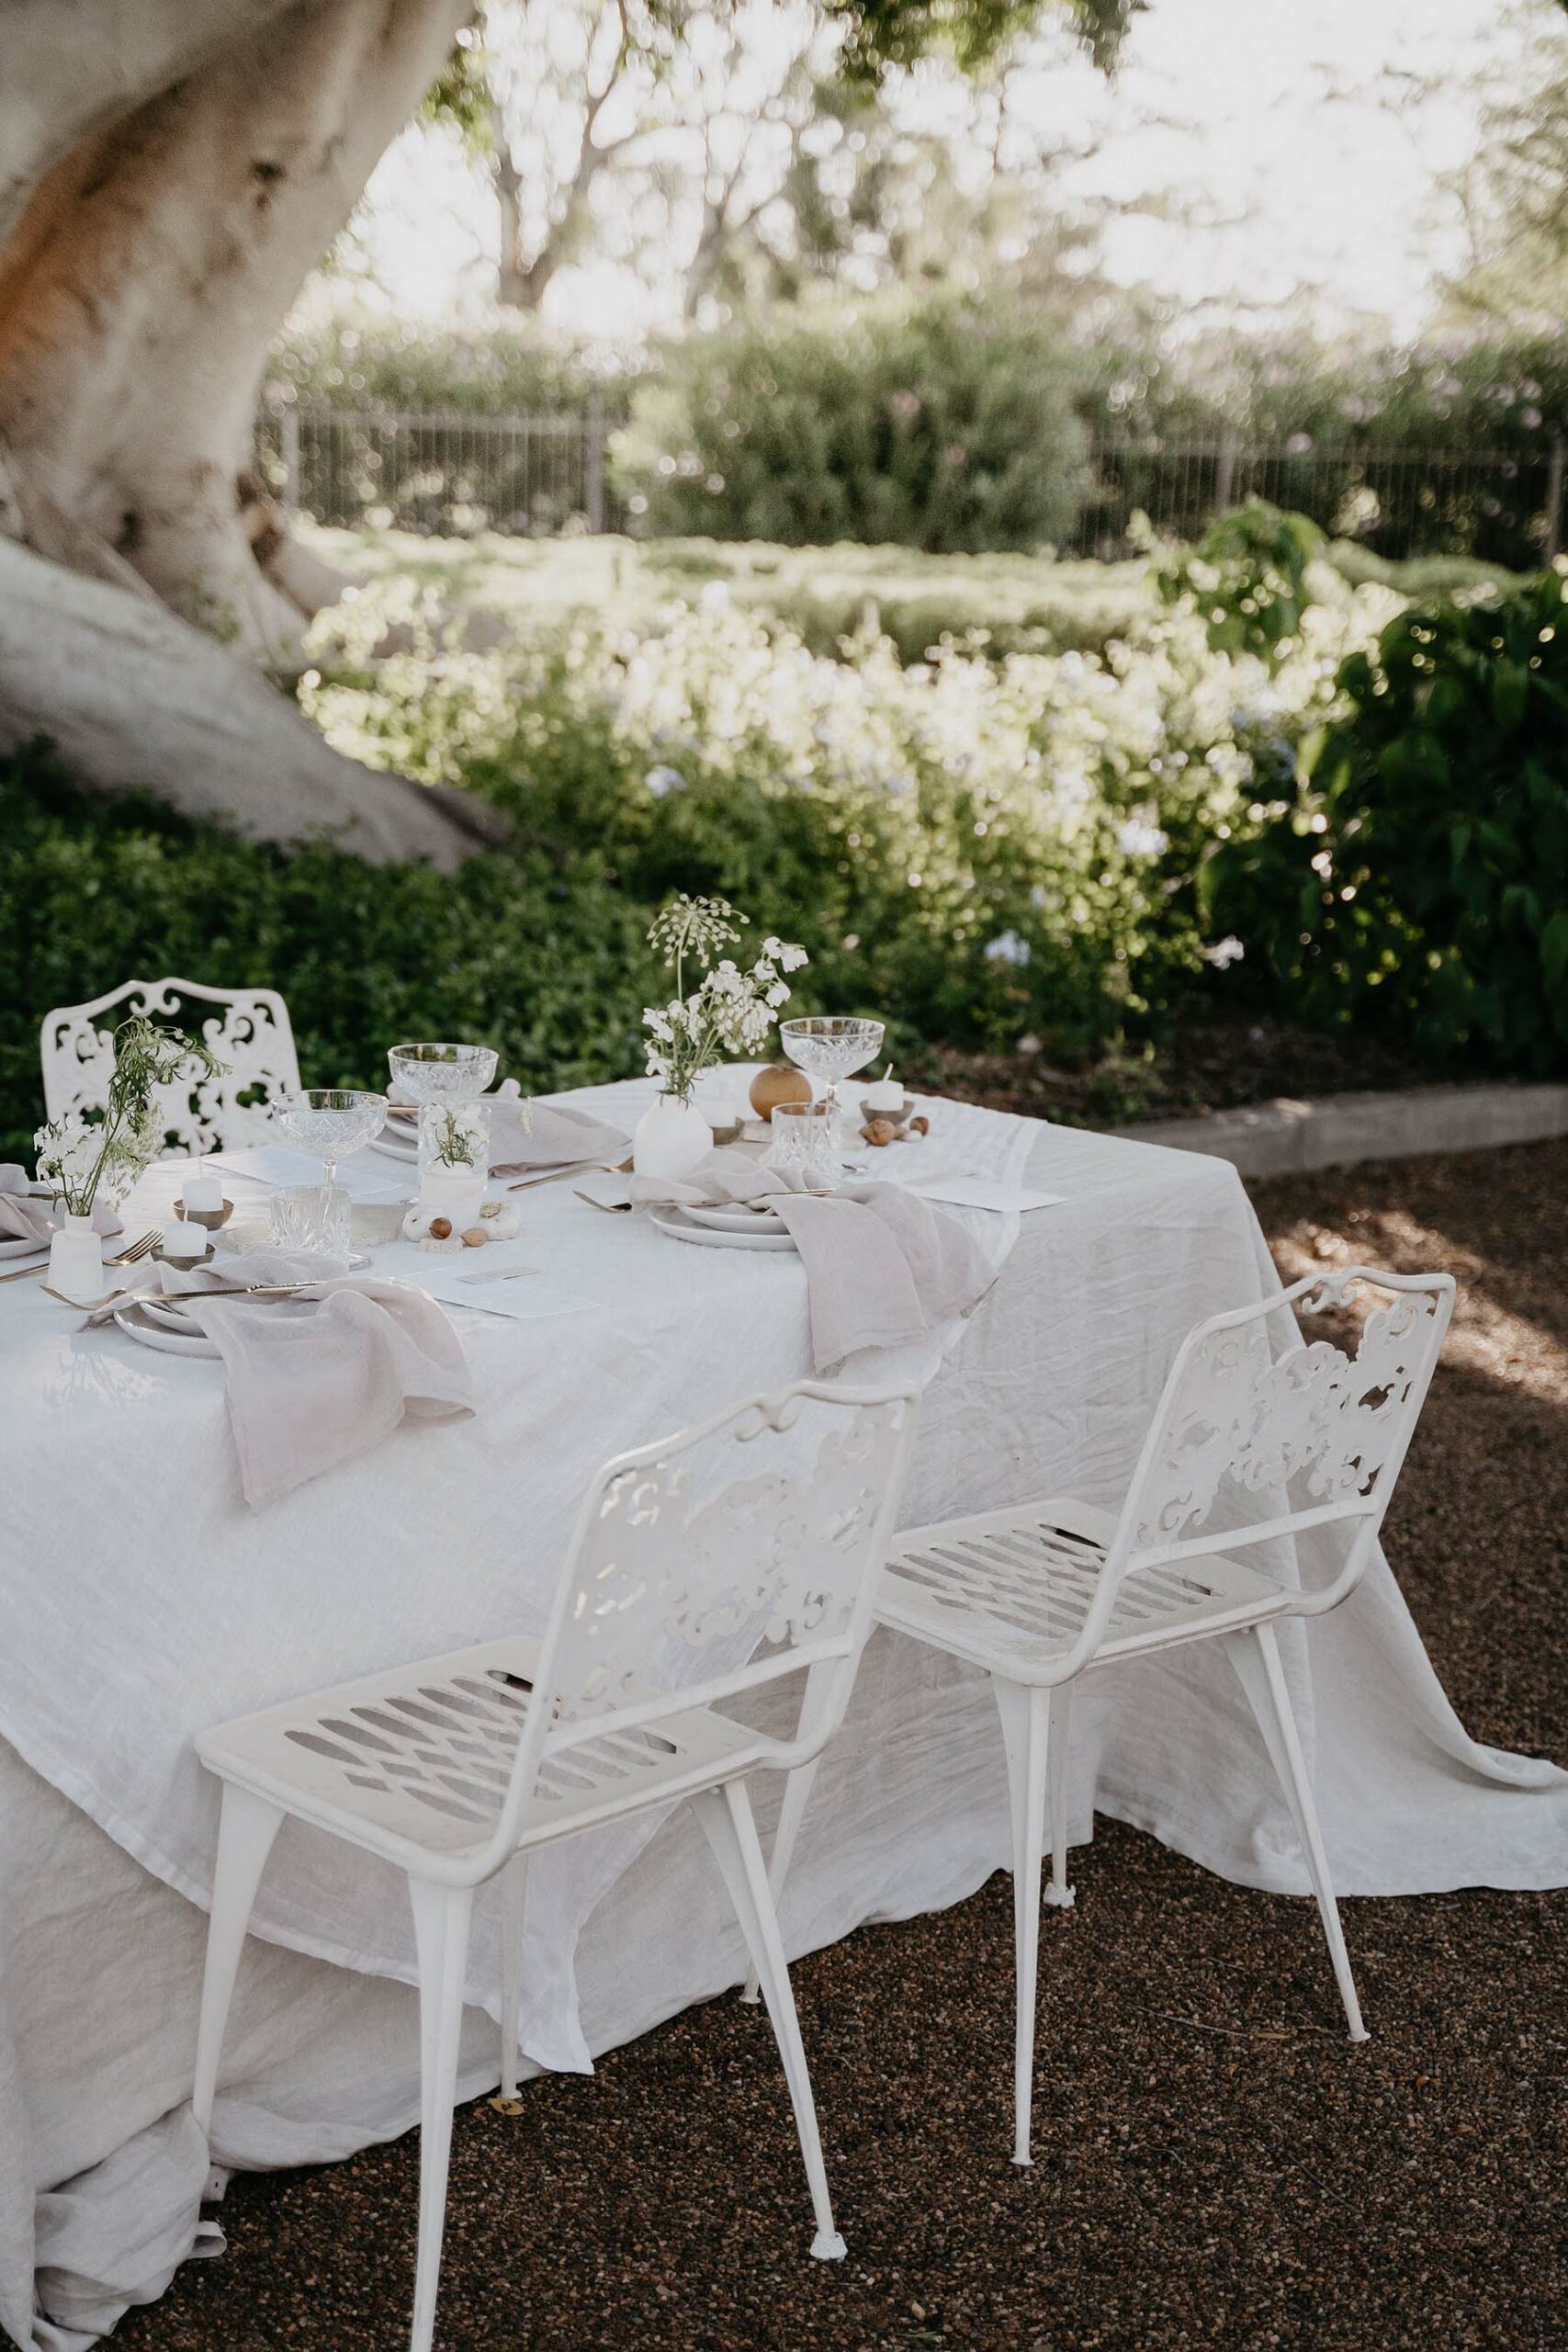 Marry Now, Party Later: A Modern & Fresh Take on The Elopement Trend - Tablescape